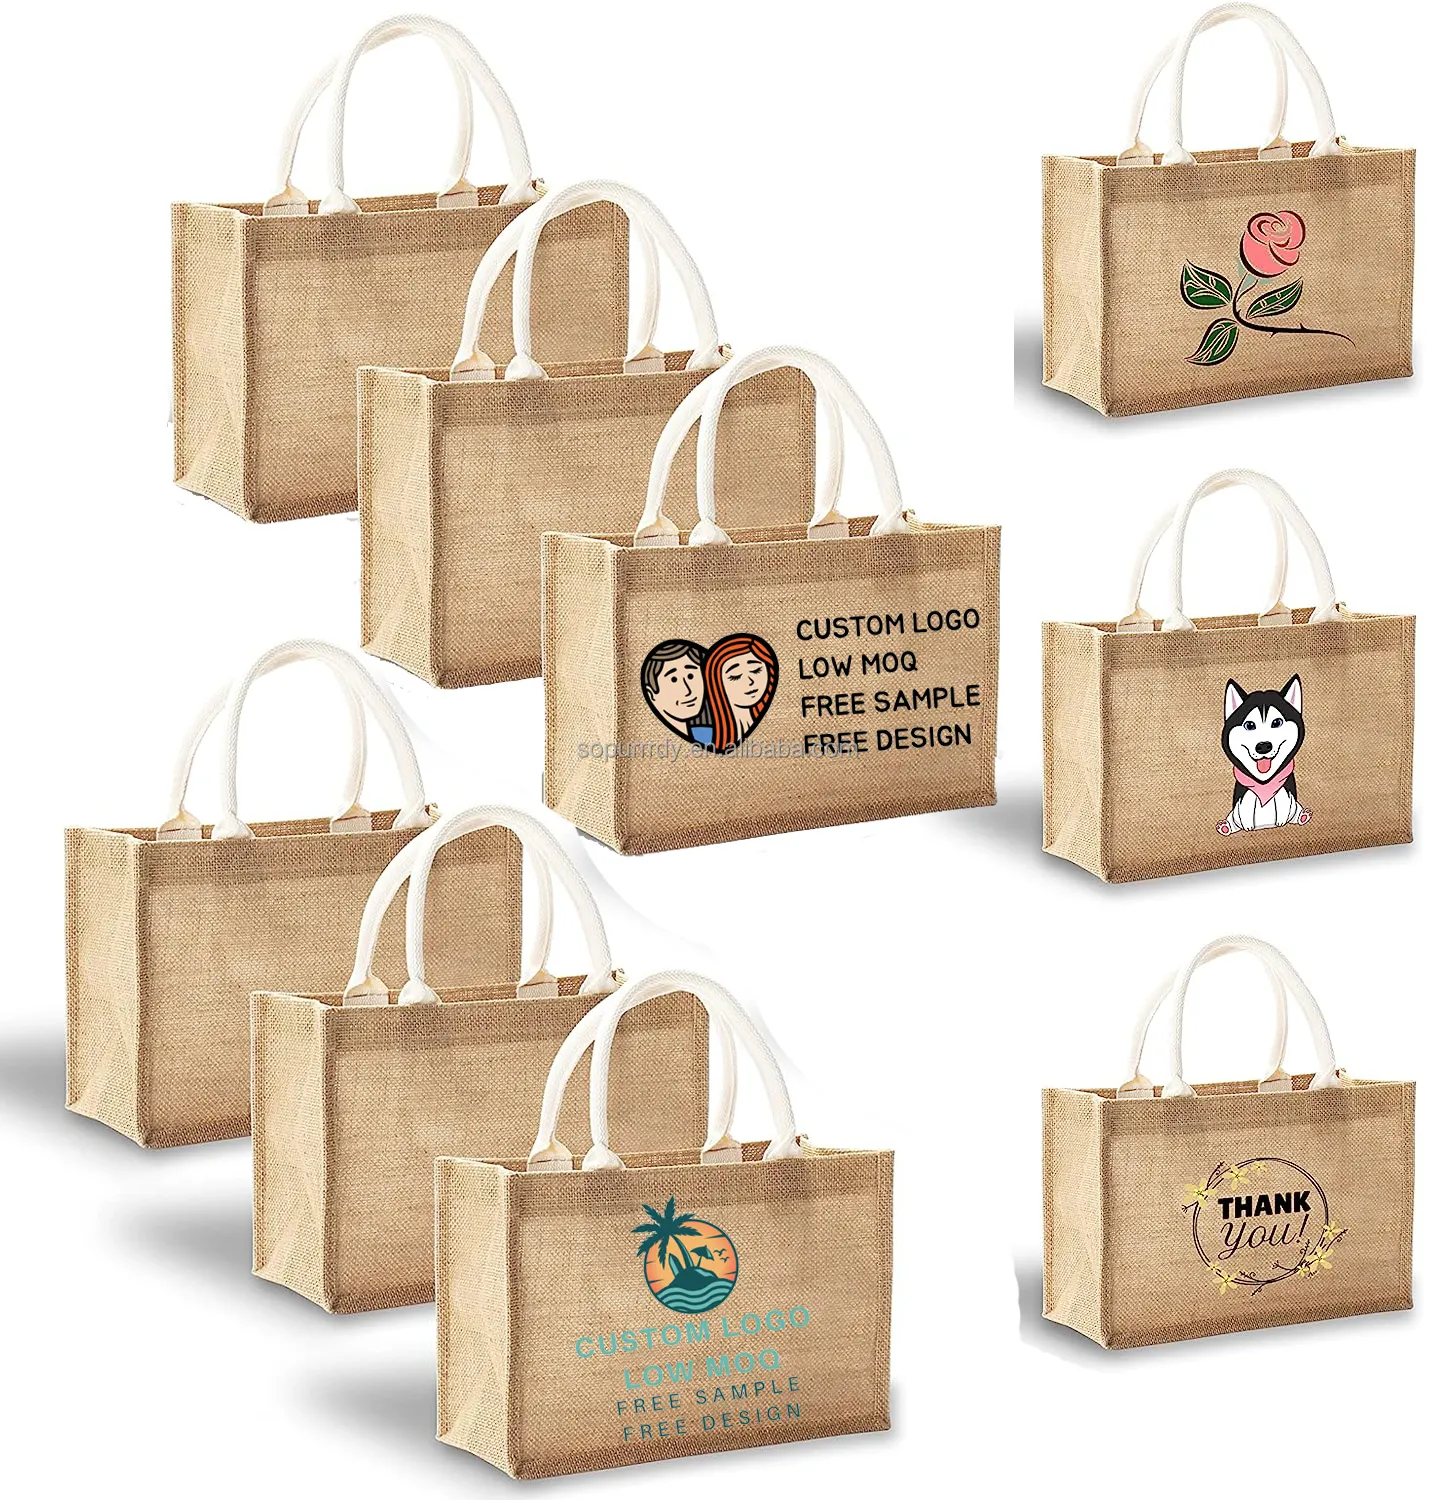 Custom Logo Promotional Large Natural Burlap Jute Tote Bags With Handles Blank Gift Beach Totes Reusable Grocery Shopping Bags